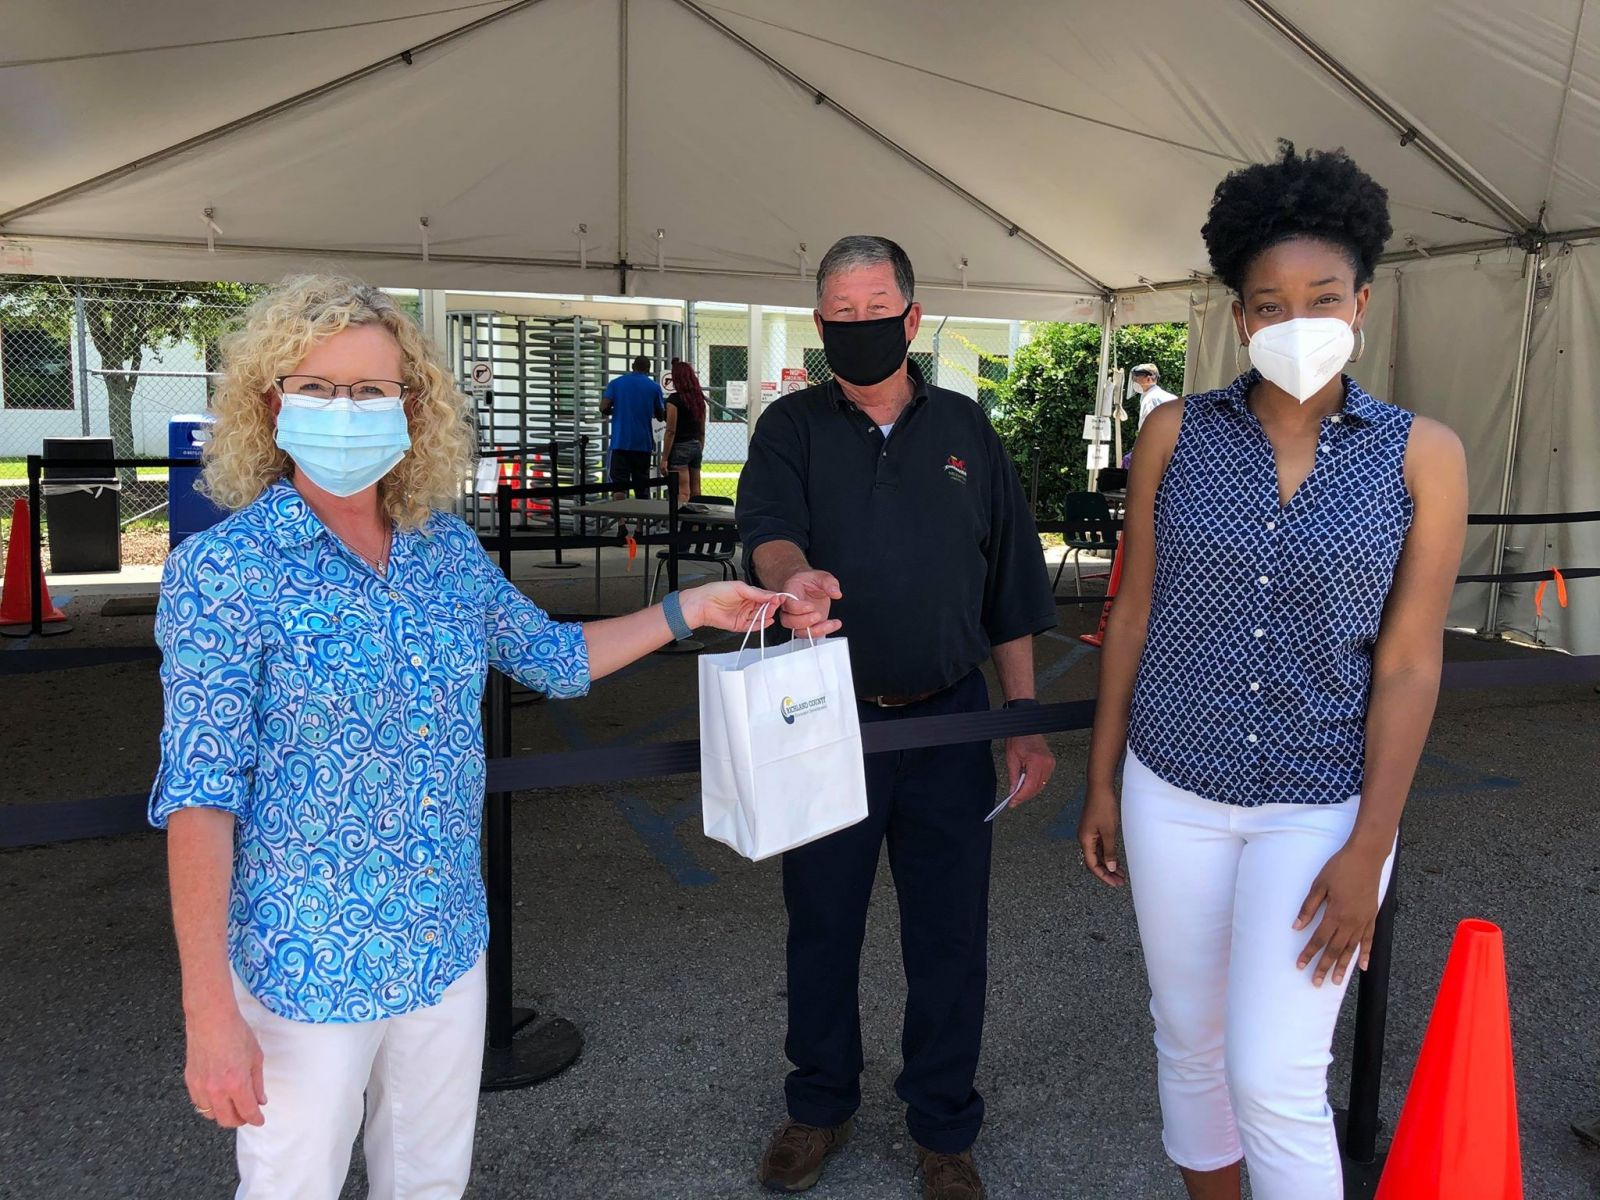 Kim Mann and Mariah Washington of Richland County Economic Development deliver noncontact infrared thermometers to Jay Metts of McEntire Produce. (Photo/Provided)